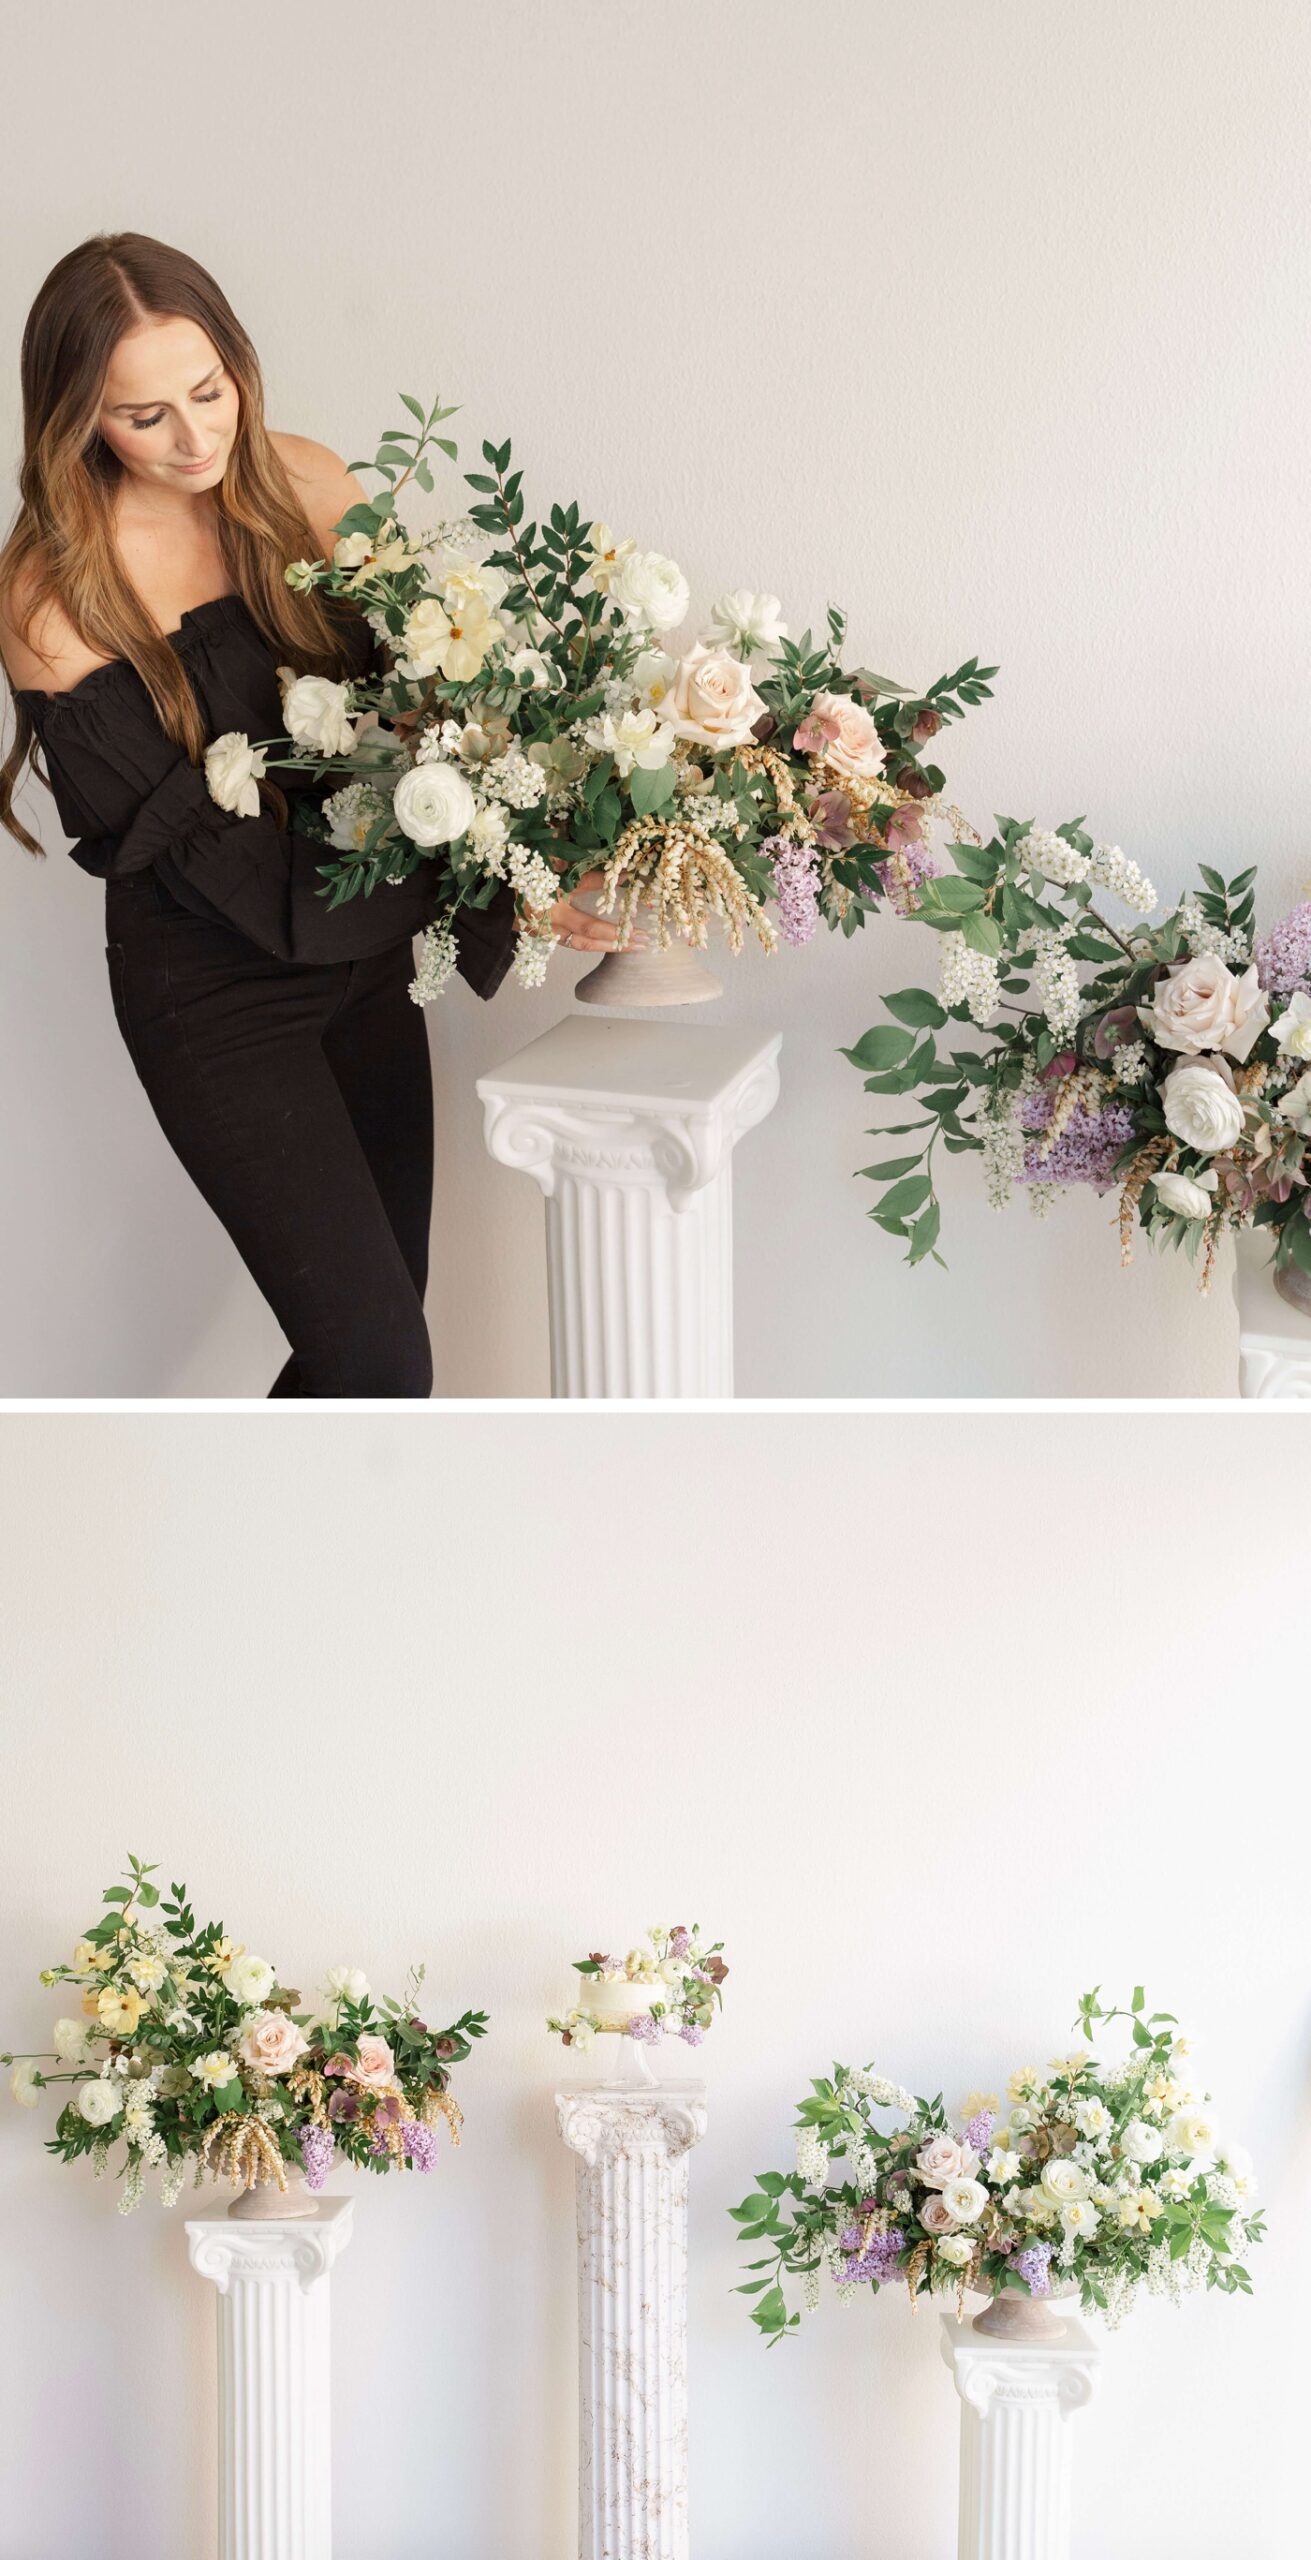 Aesthetic Events and Florals - Lancaster, PA Wedding Florist